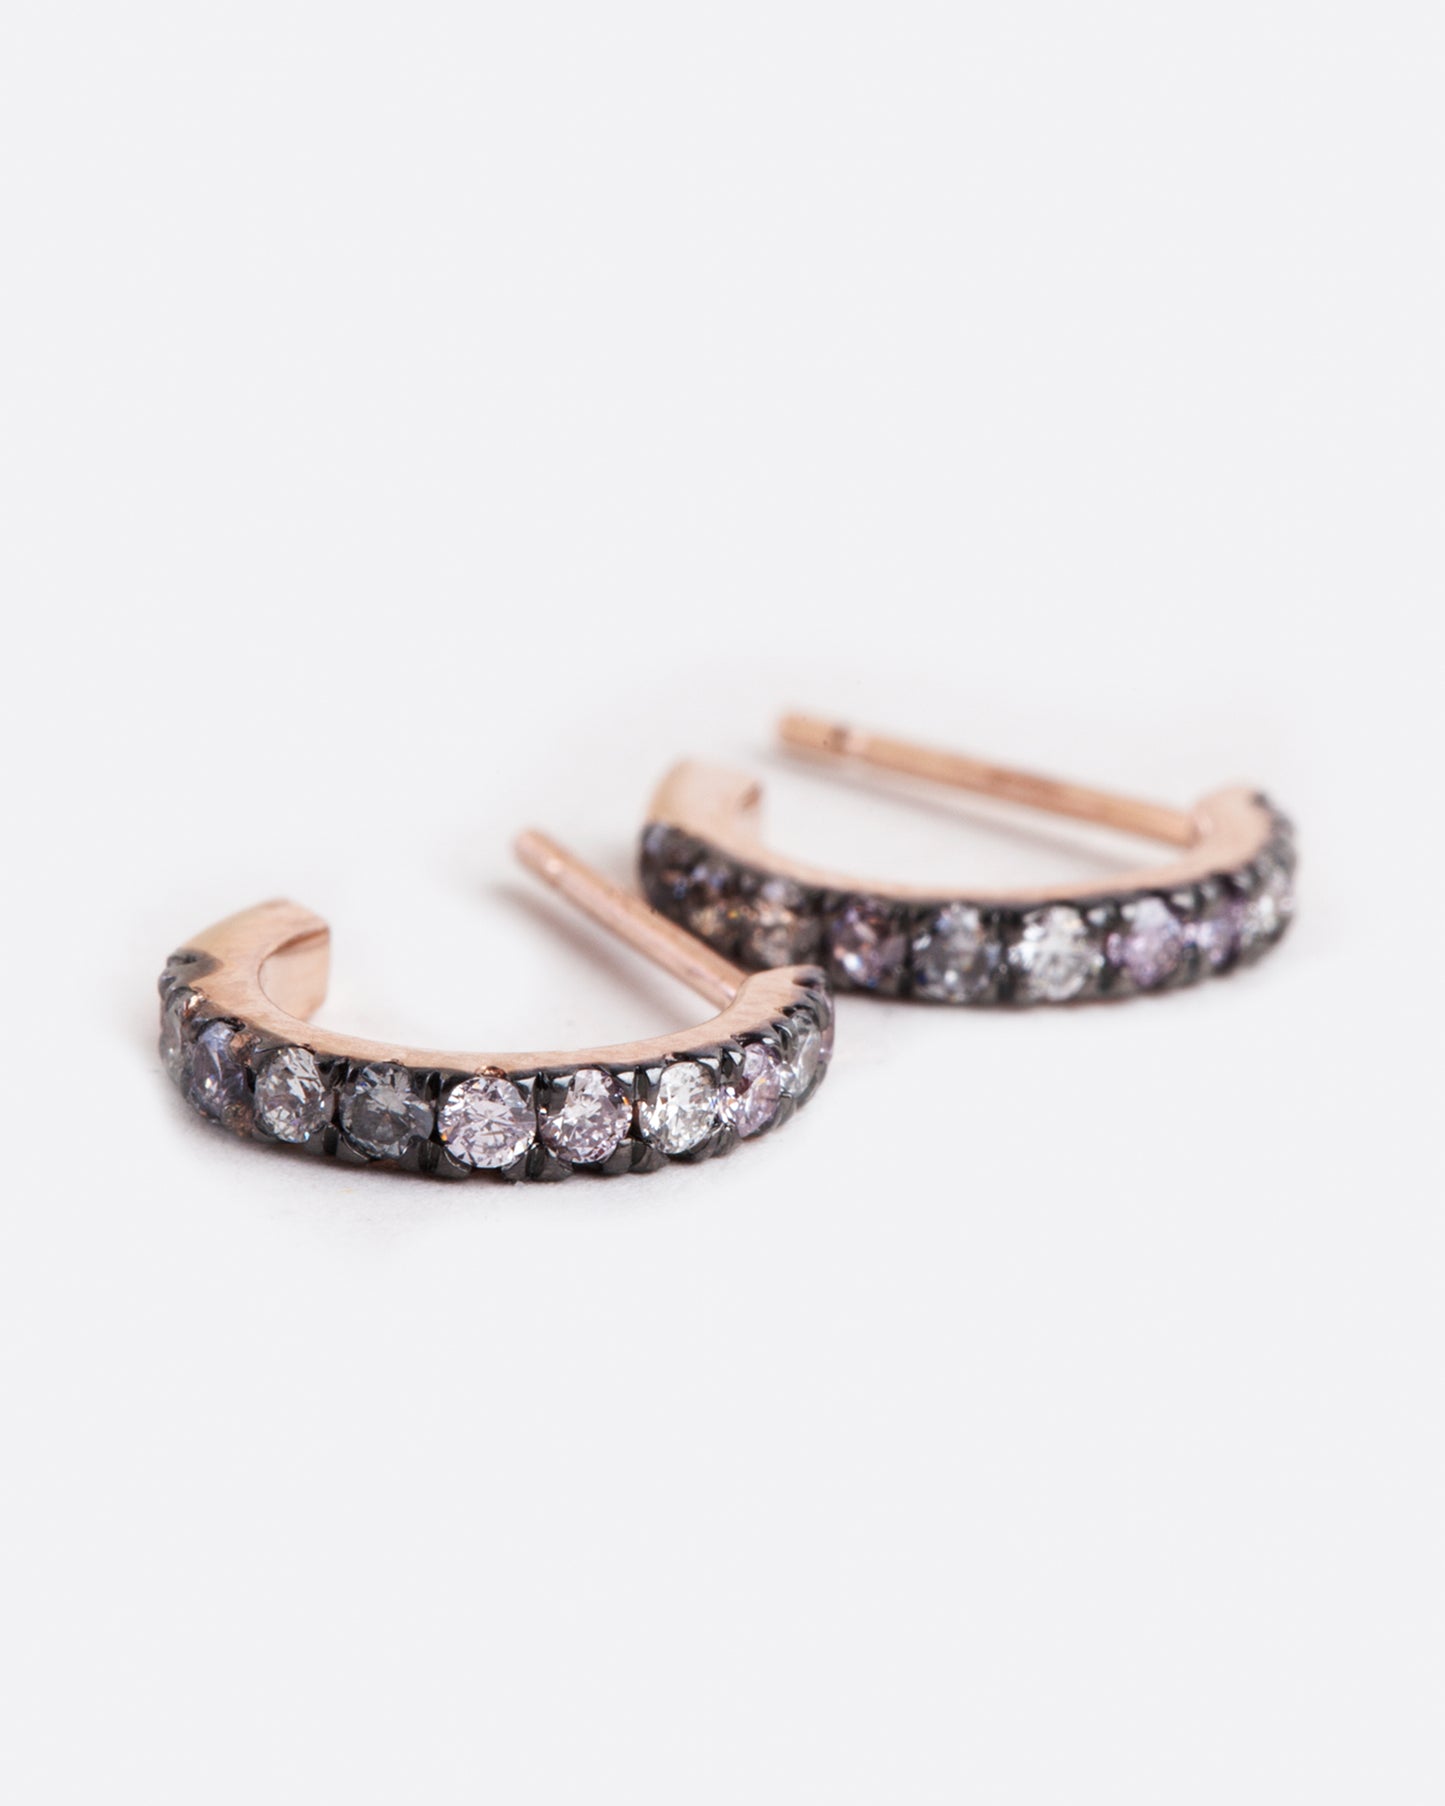 side view of huggie hoop earrings with a stud post backing, they are rose gold with blackened settings around the grey, pink and white diamonds that are set along the huggie